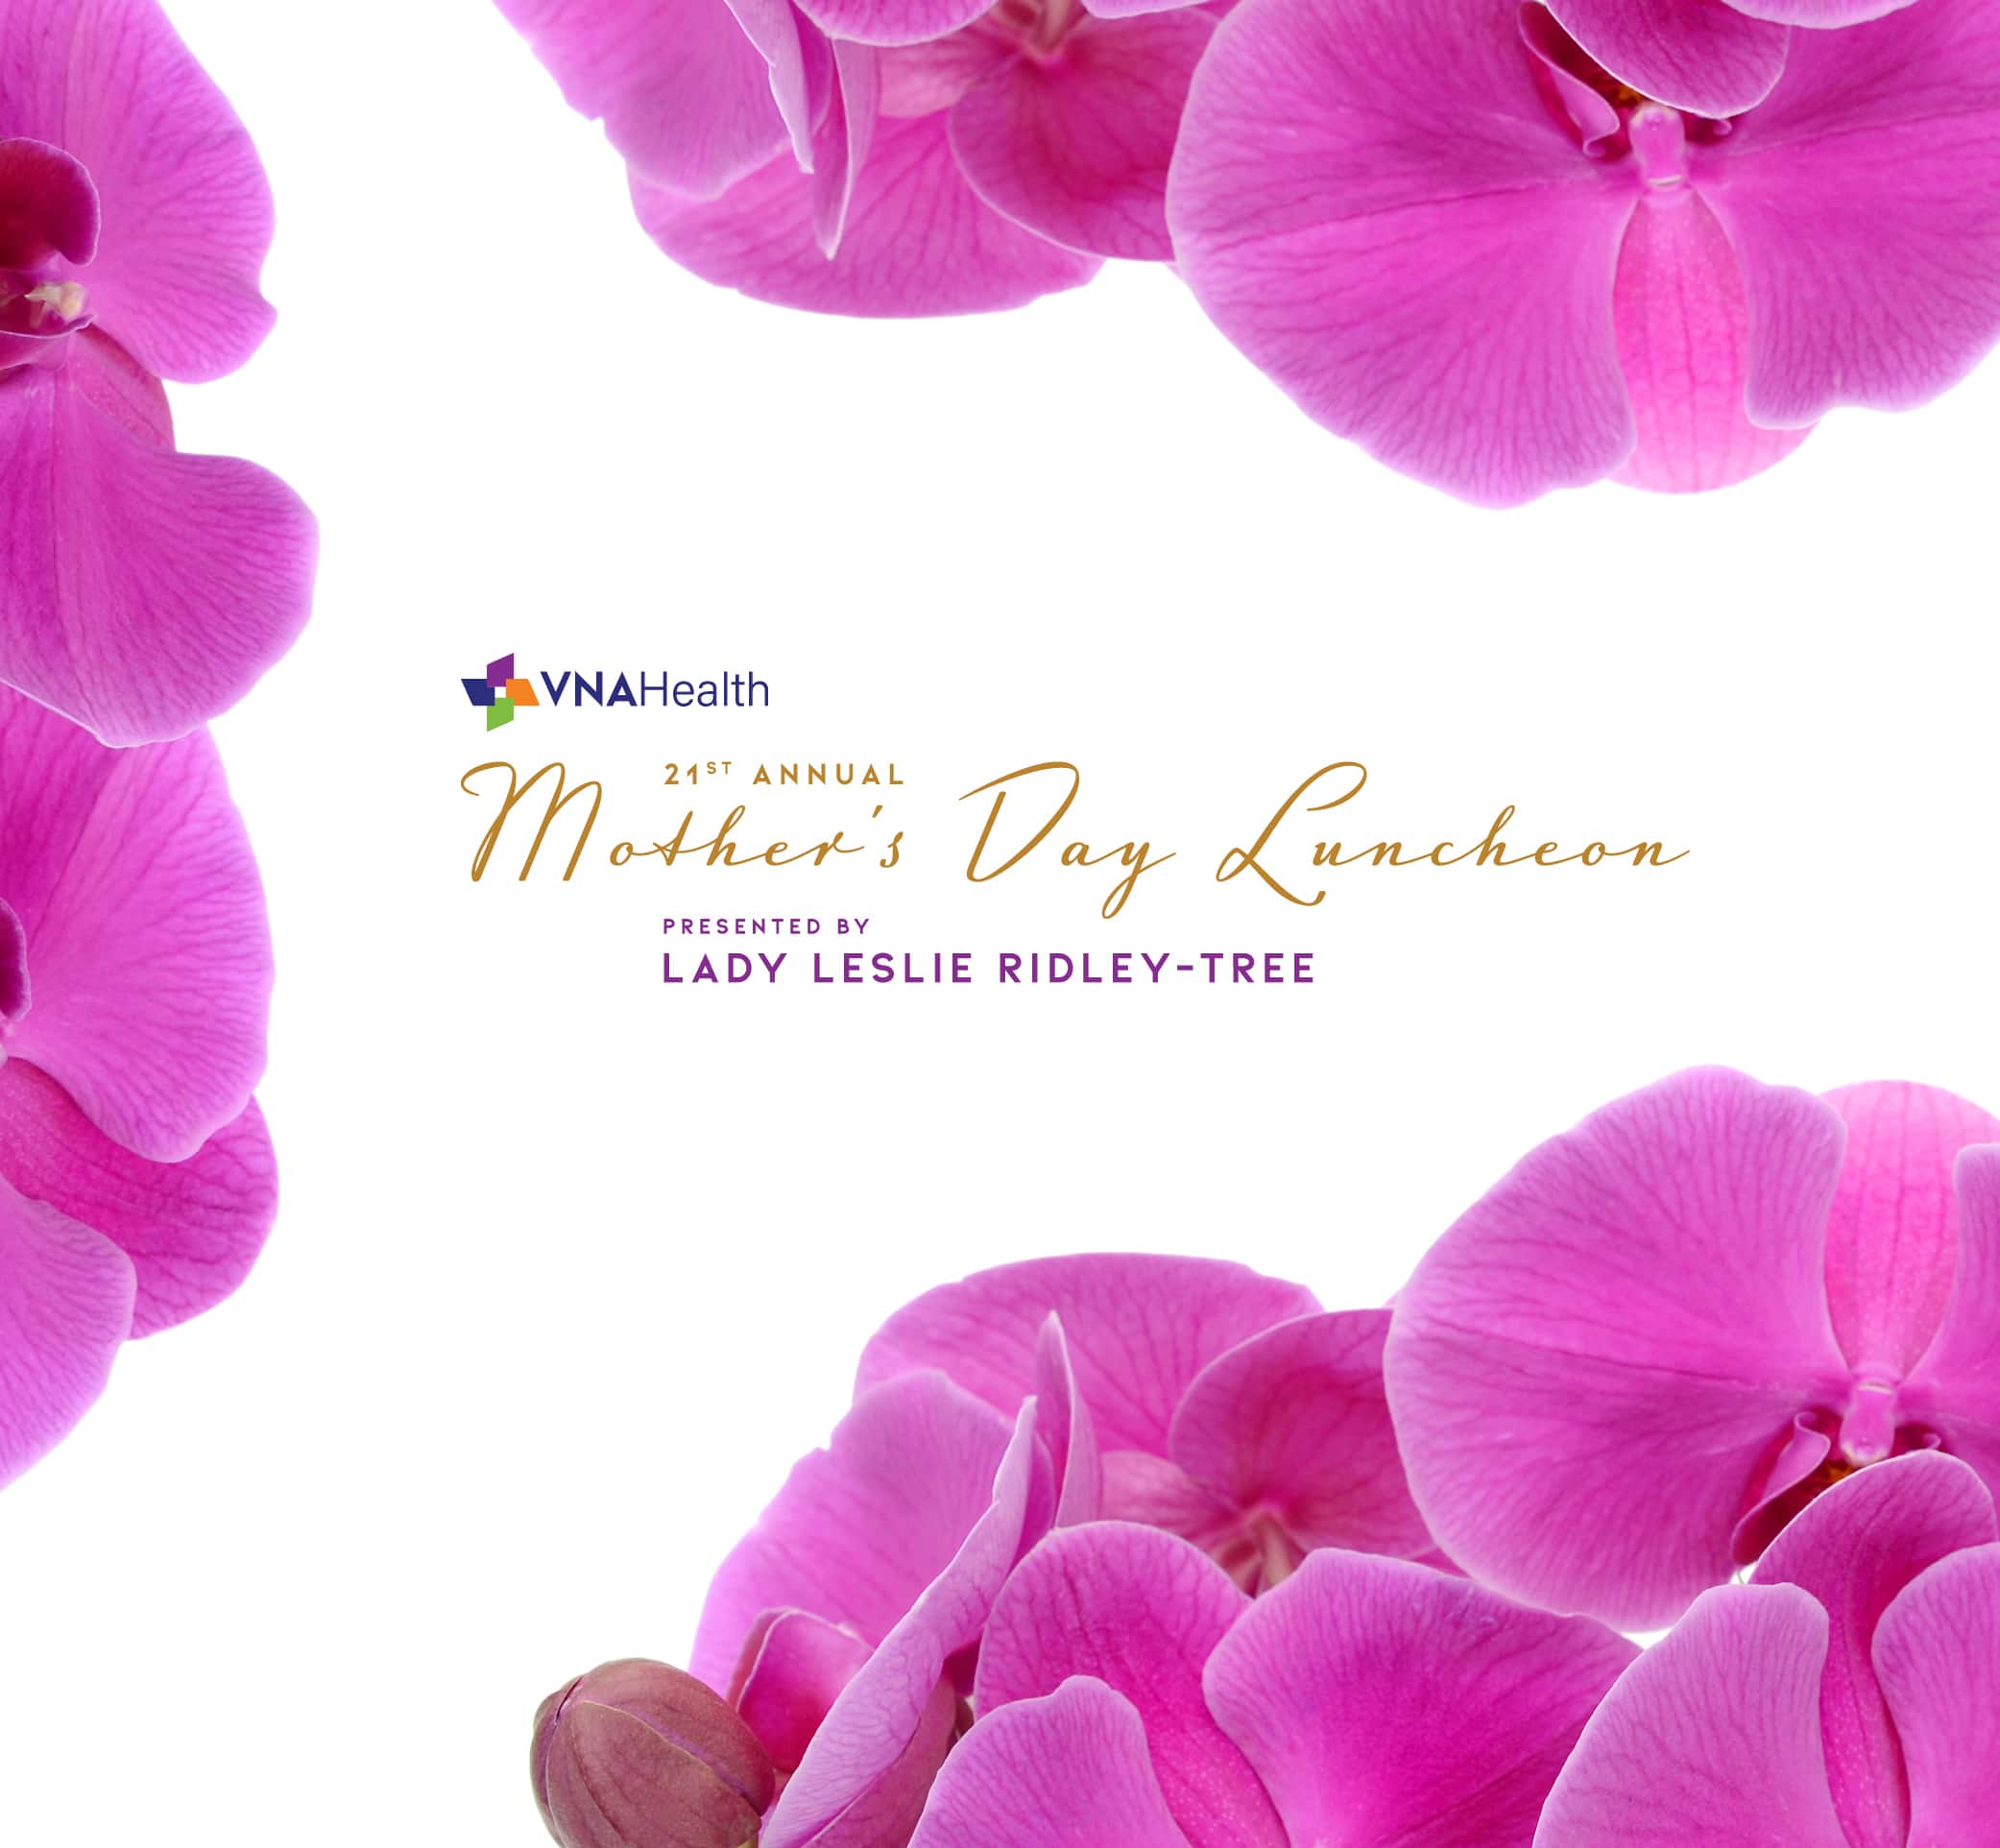 21st Annual Mother’s Day Luncheon